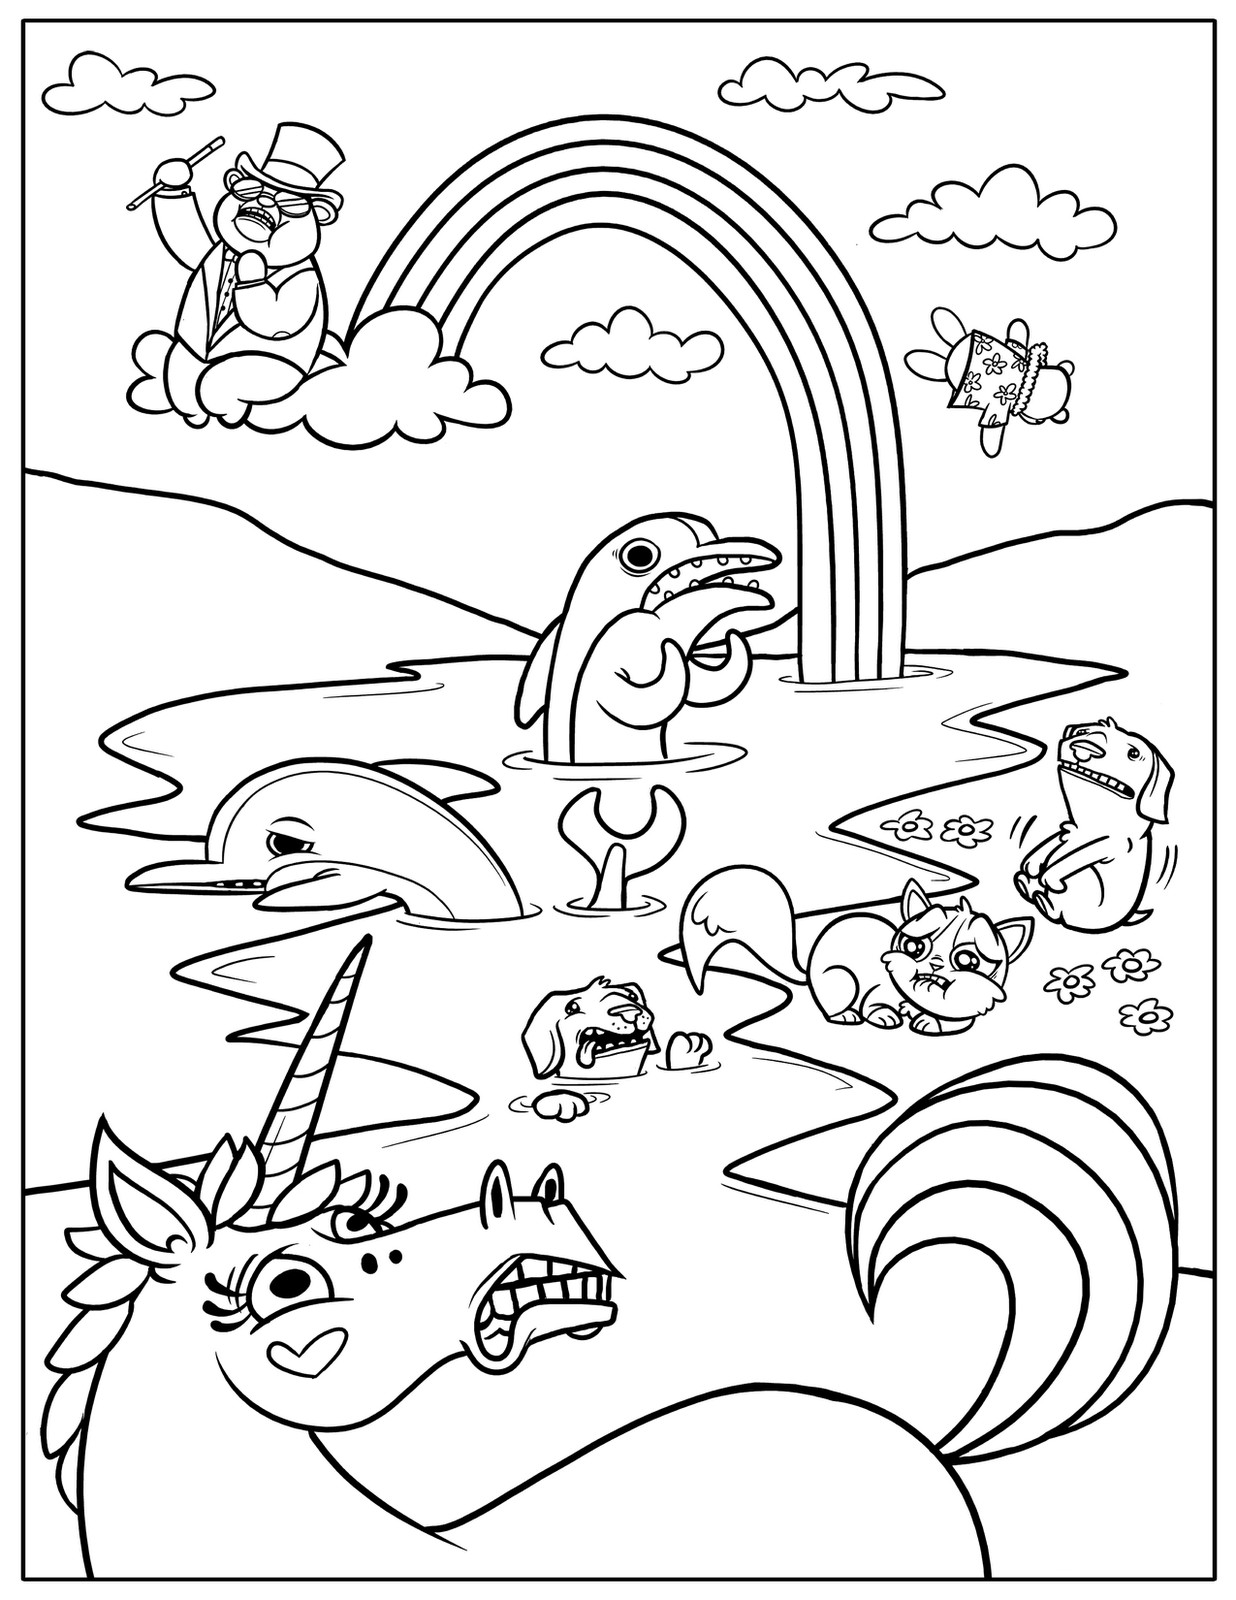 Kids Coloring Sheets
 Free Printable Rainbow Coloring Pages For Kids